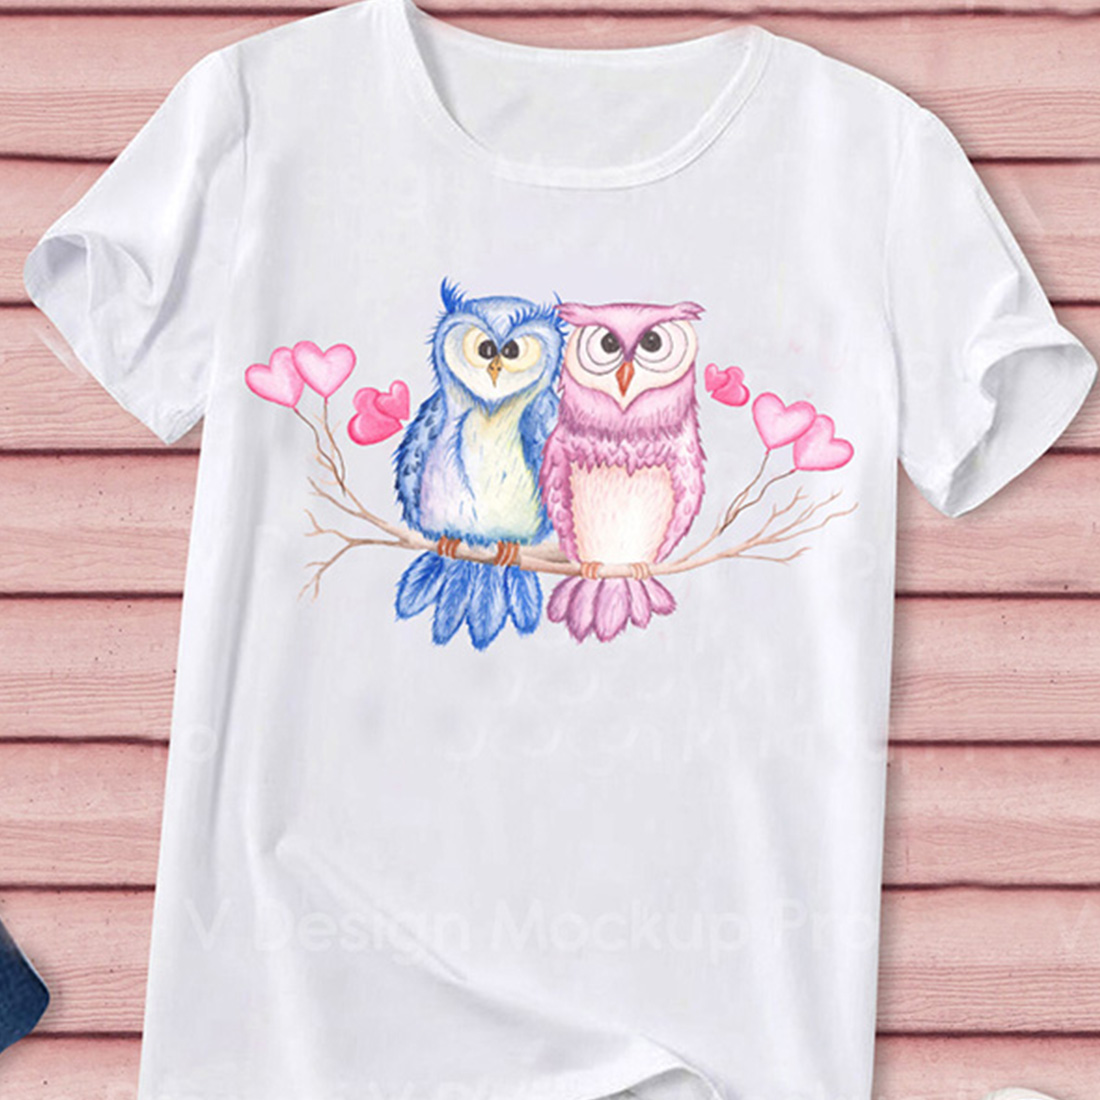 Classic white t-shirt with cute lovely owls.